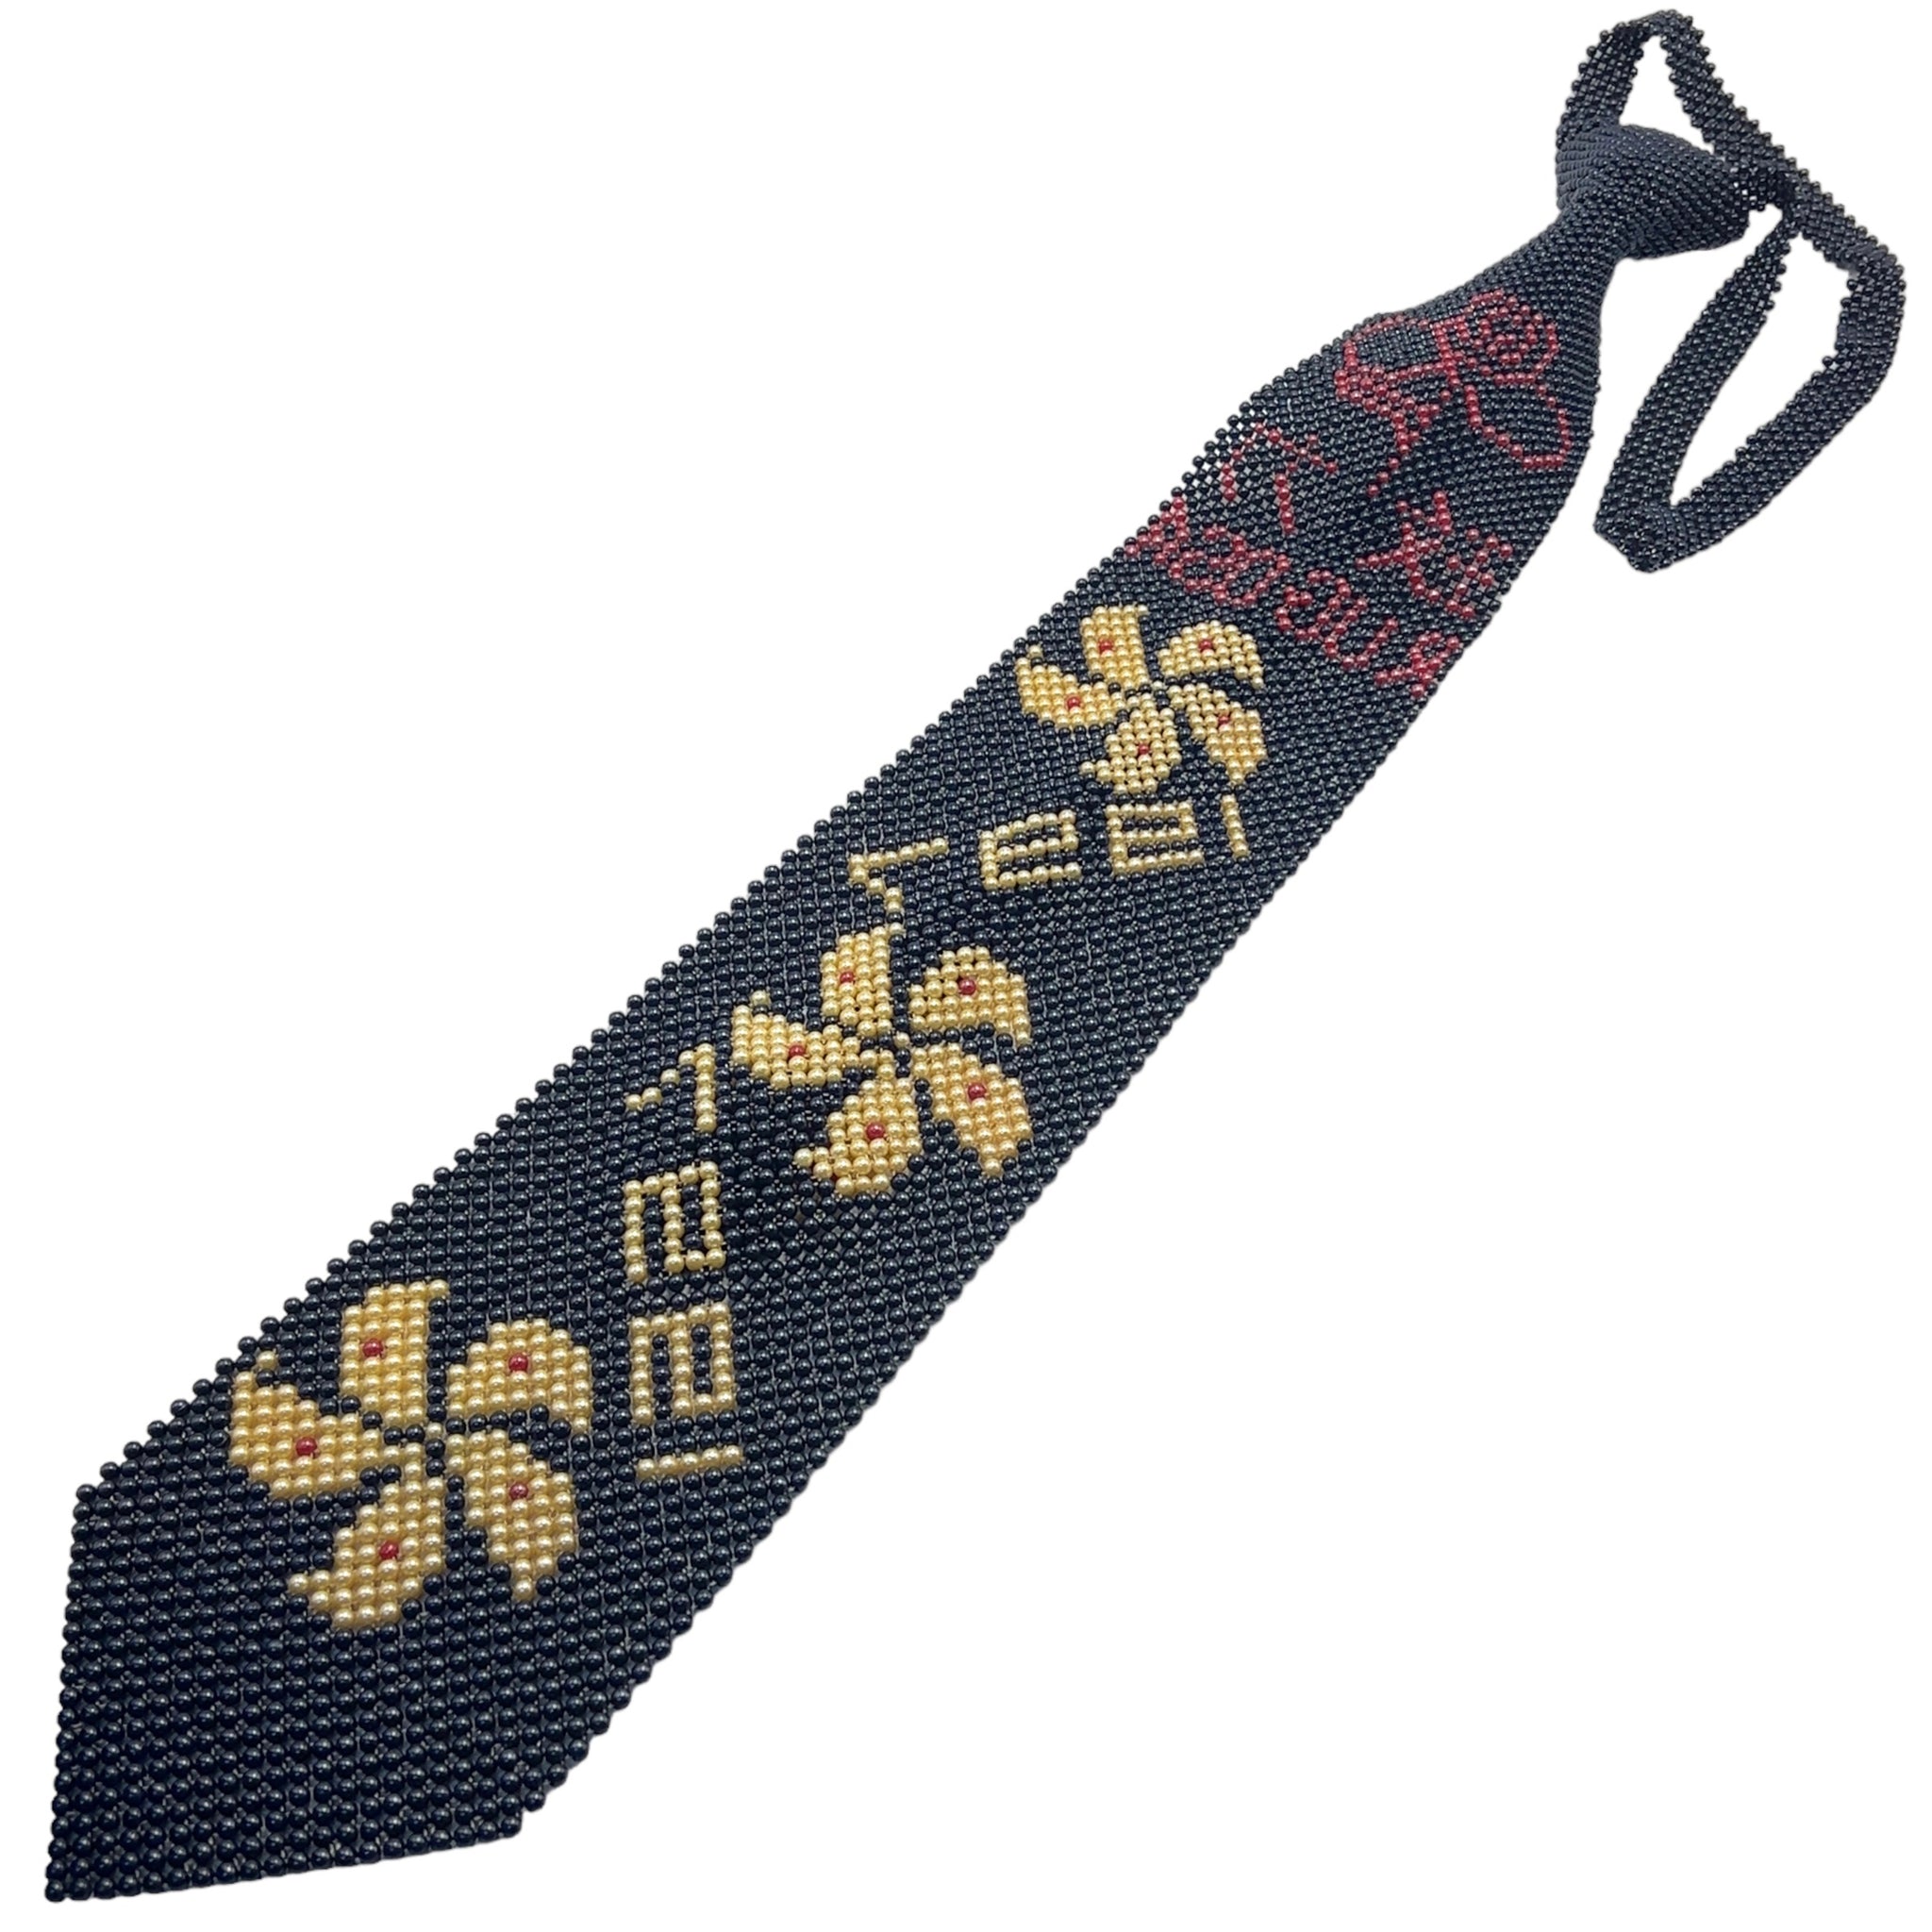 1997 China Theme Pearl Tie Vintage Inspired Cultural Elegance